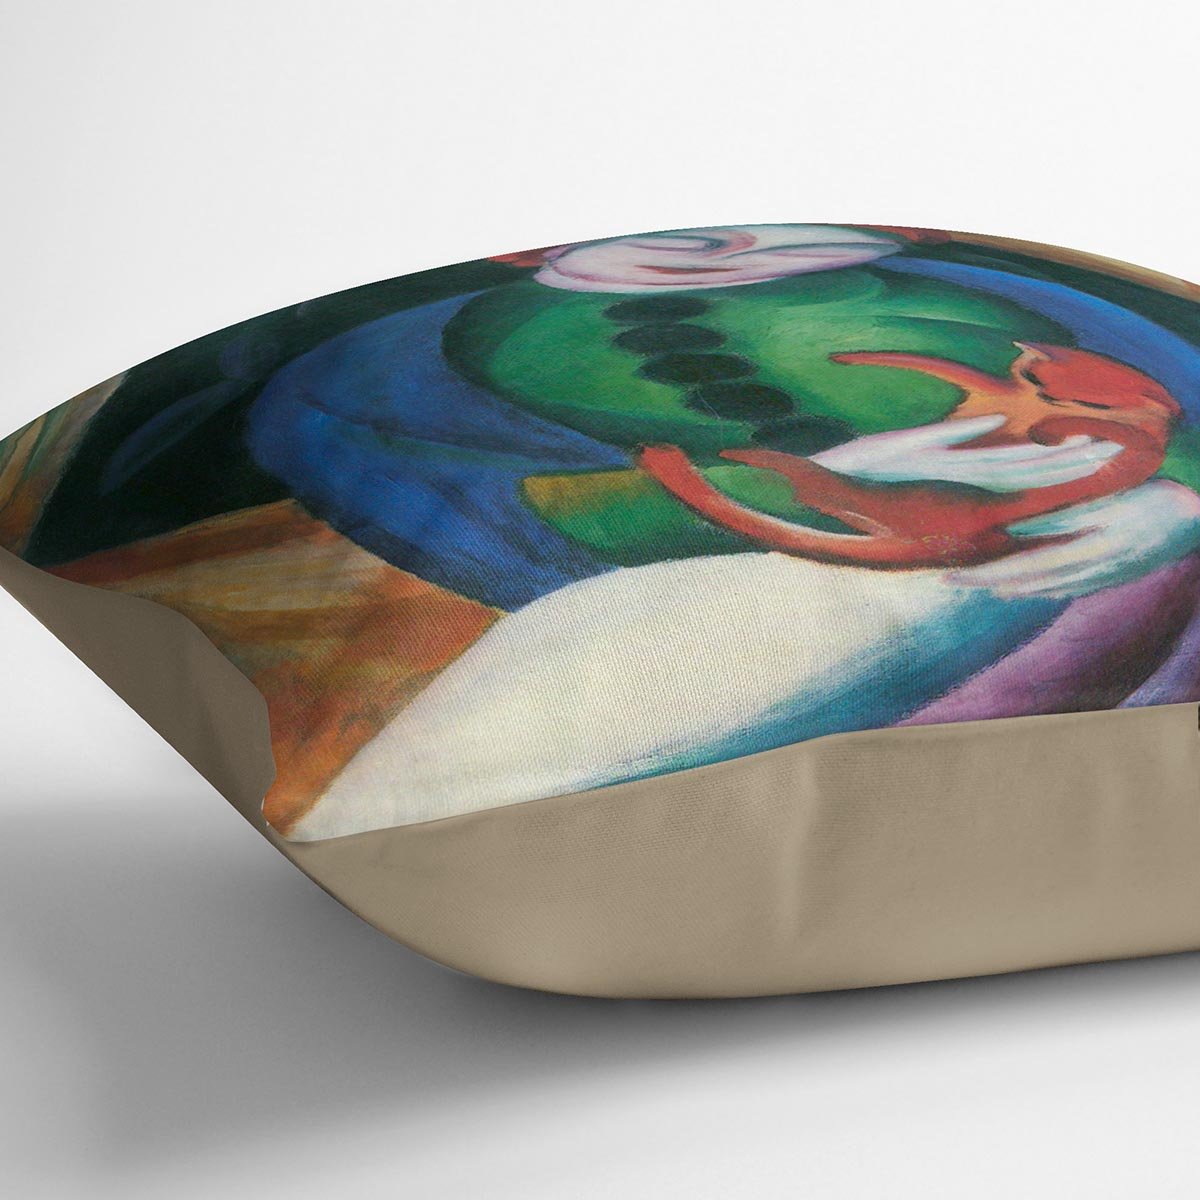 Girl with a Cat II by Franz Marc Throw Pillow